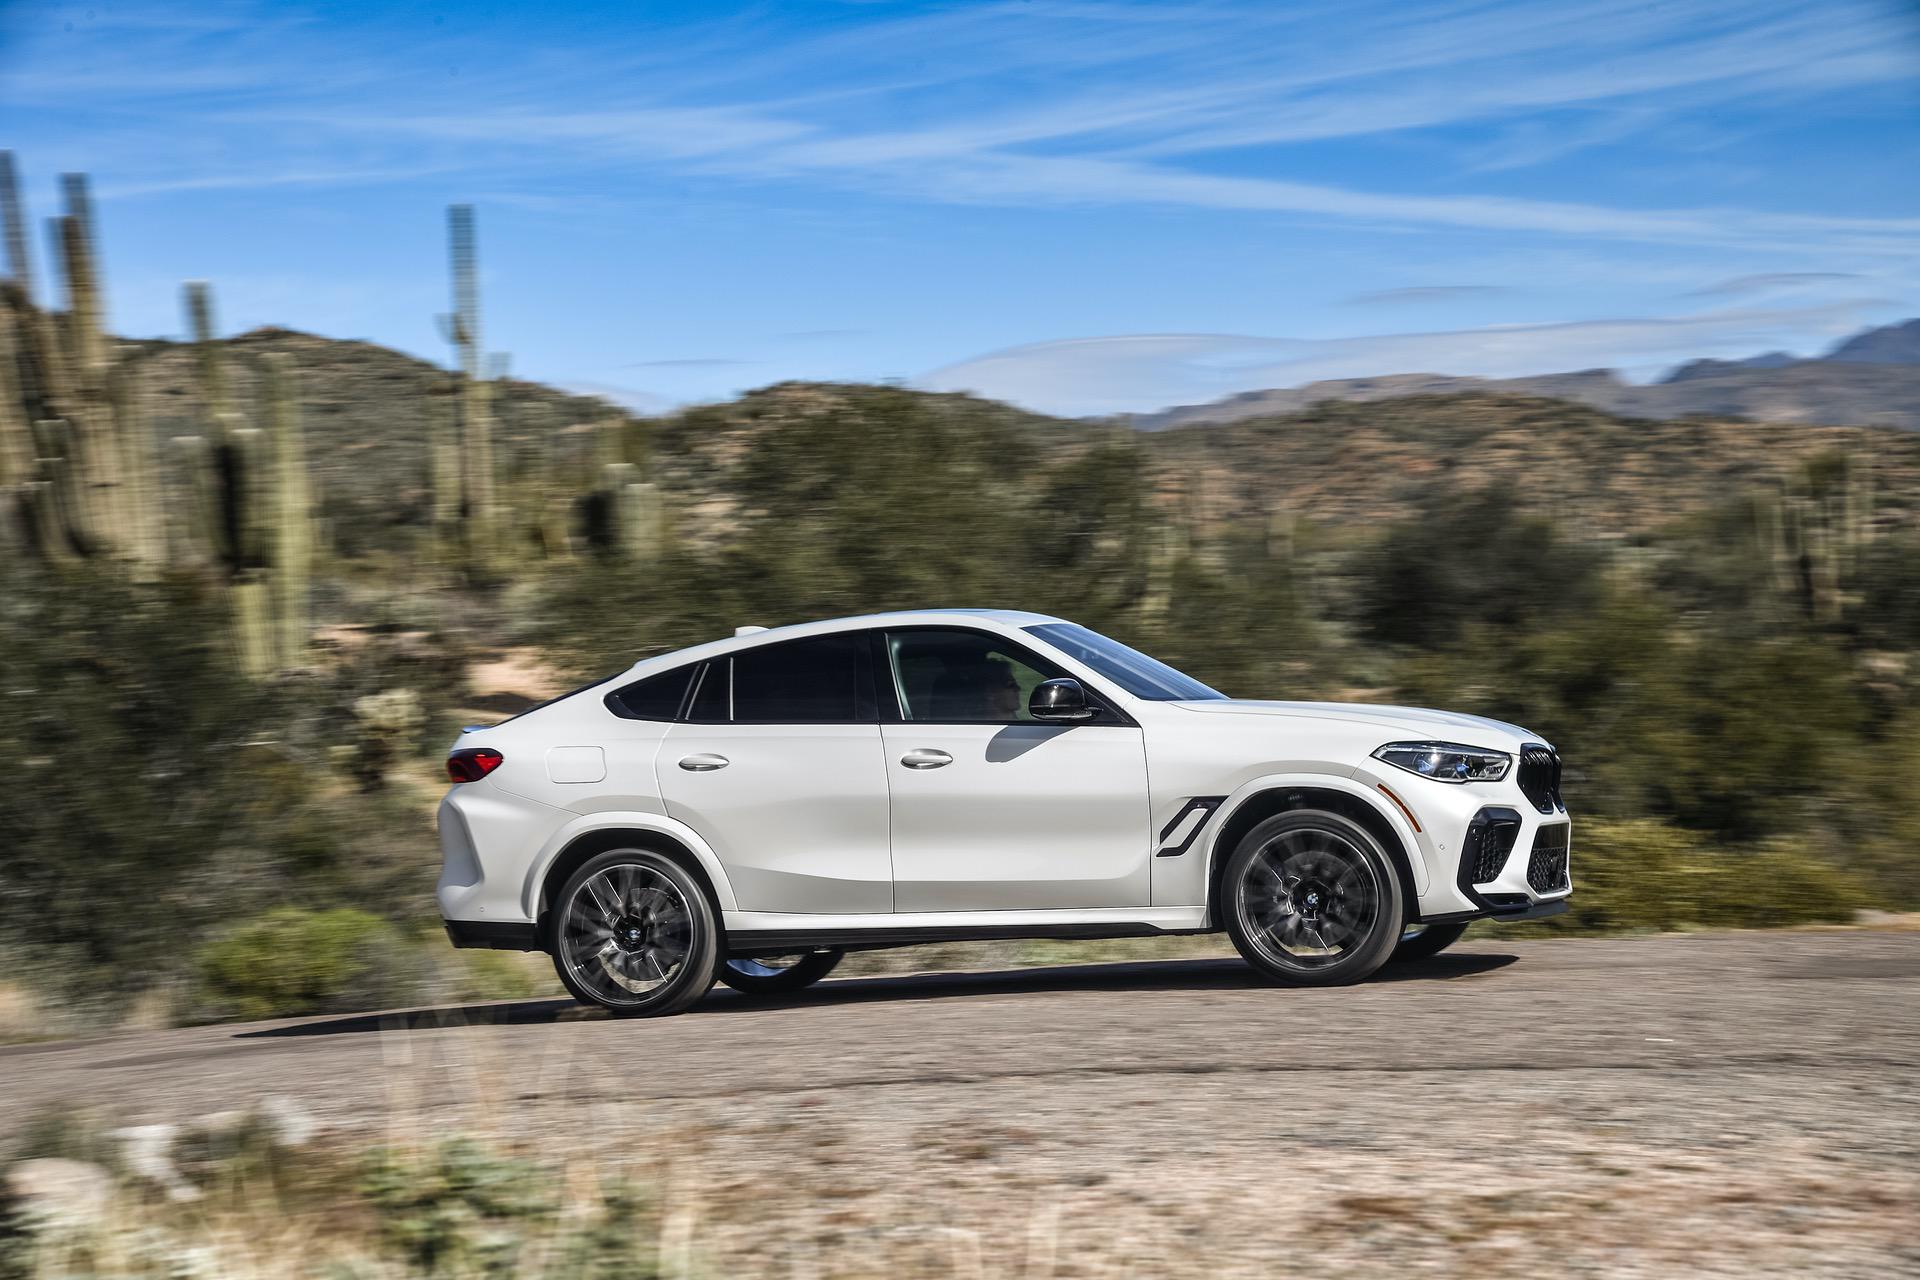 X6 competition